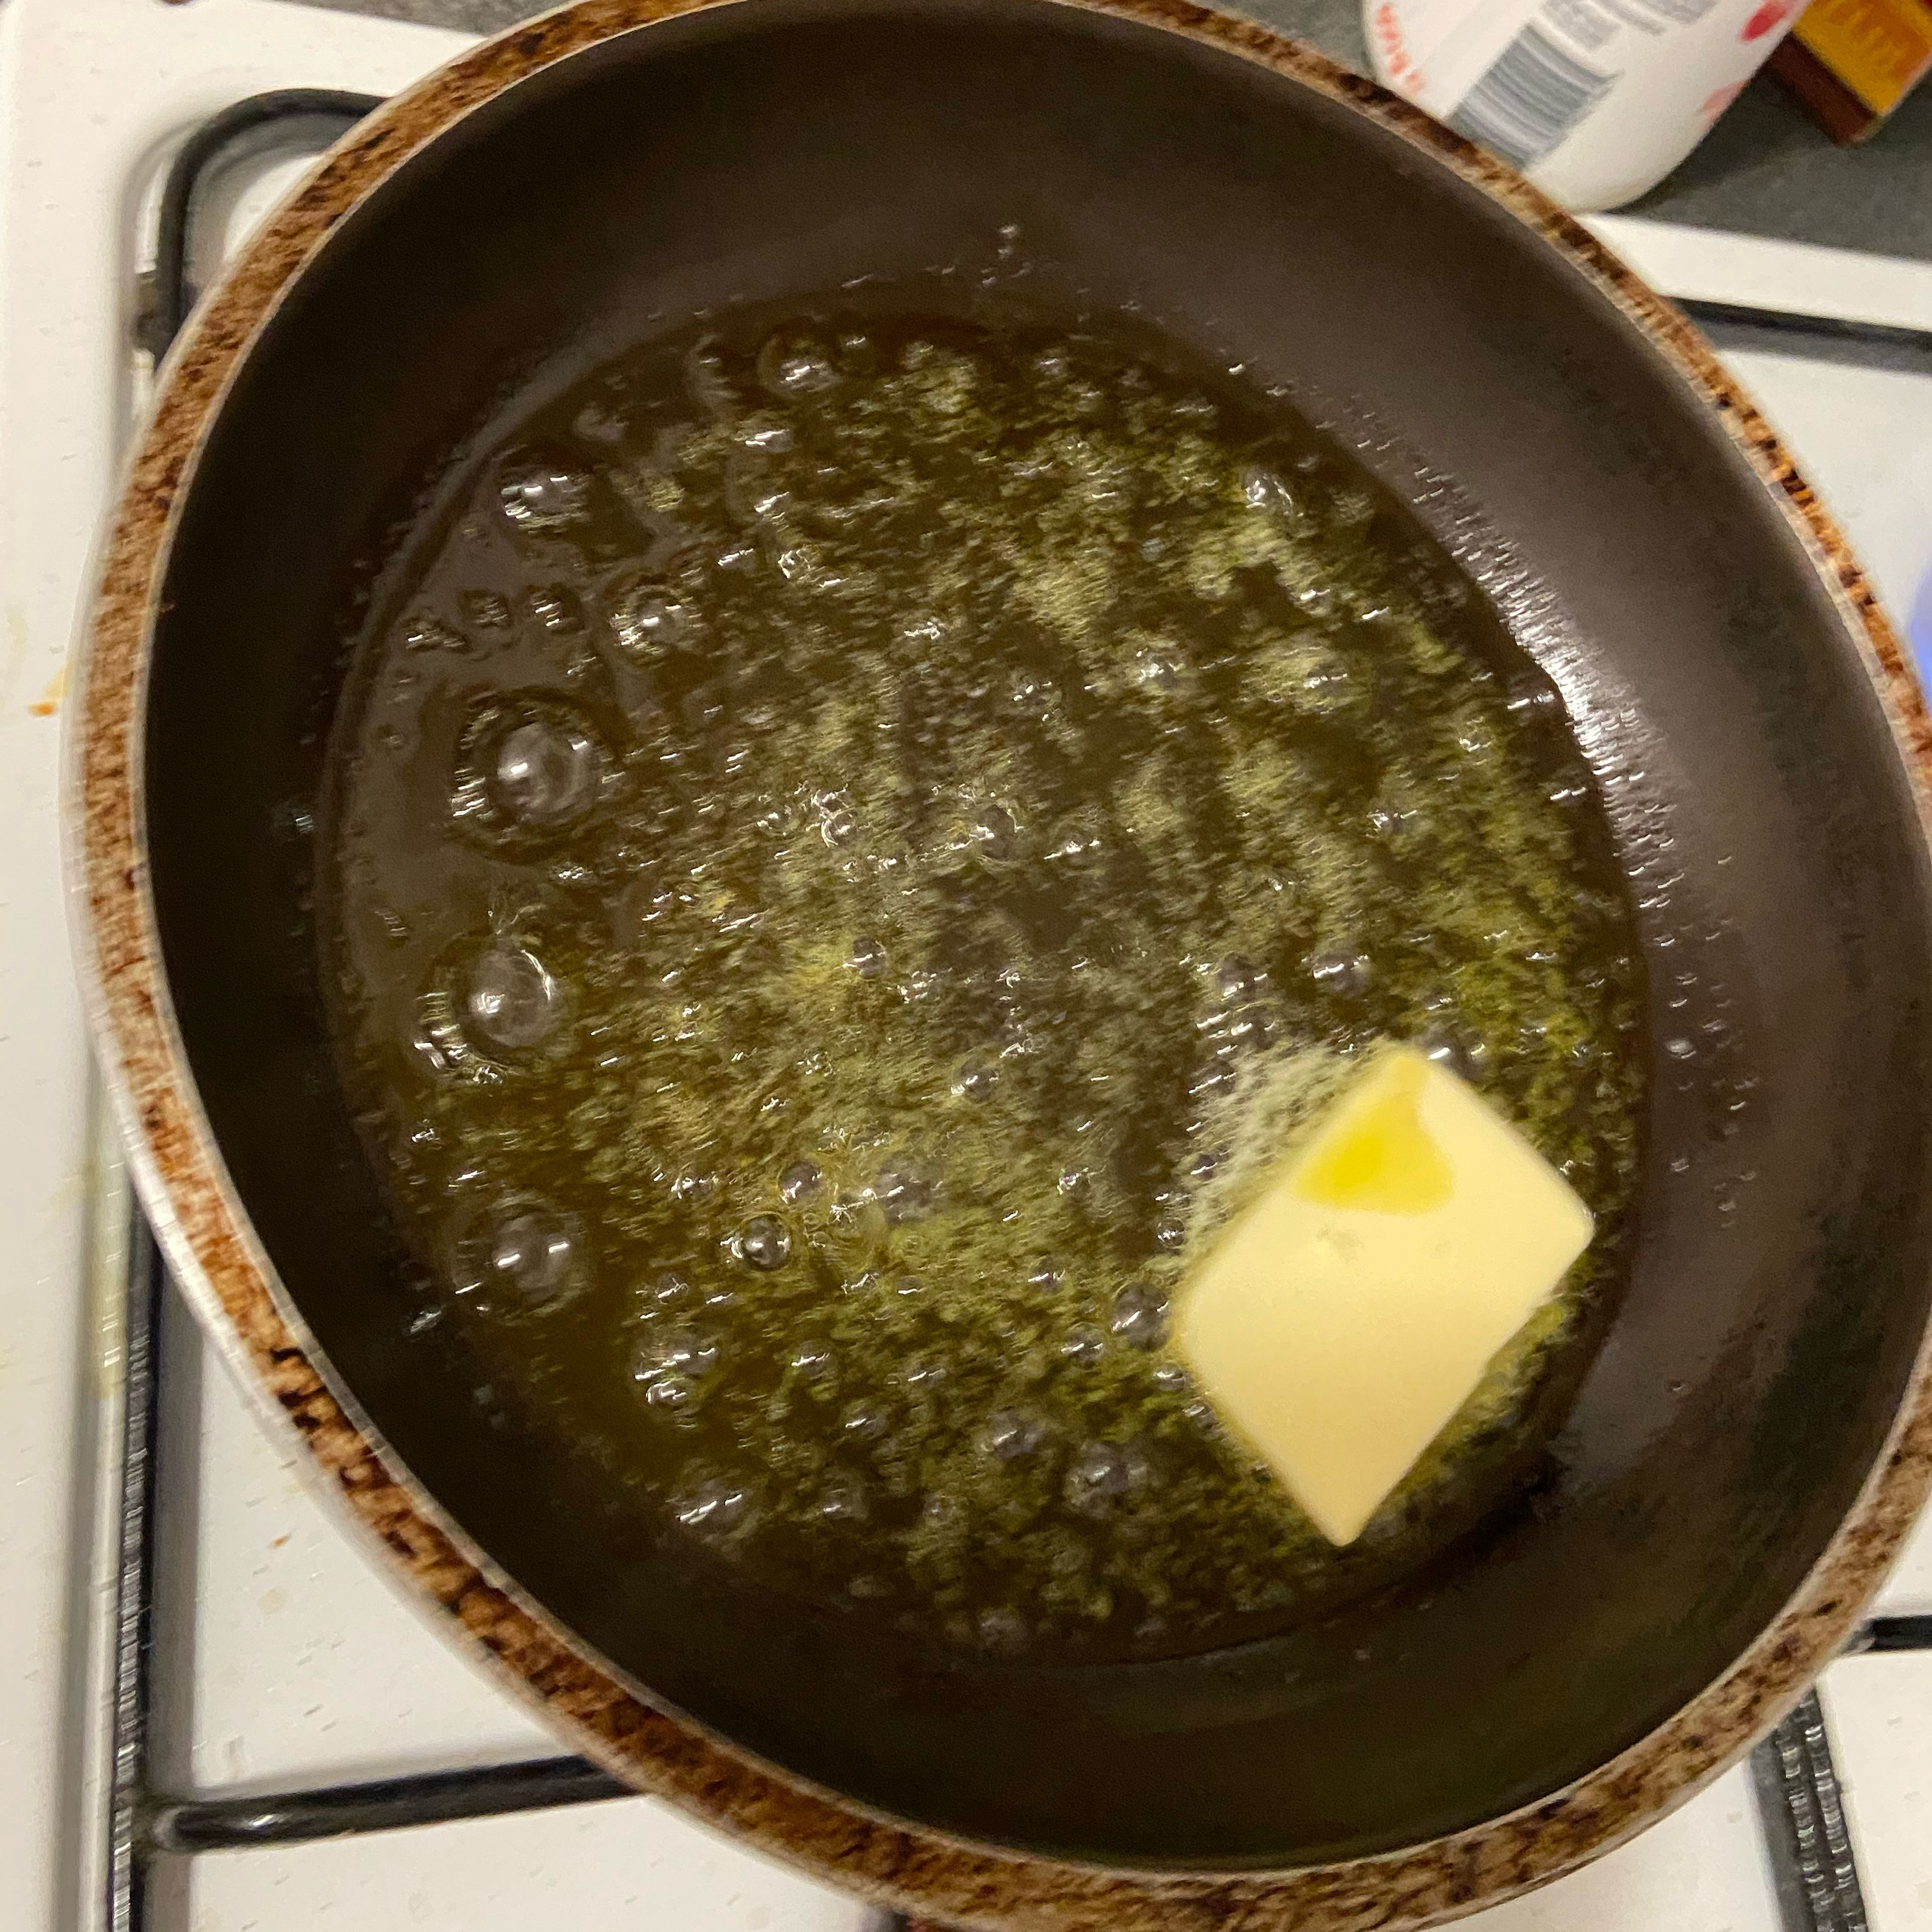 Heat a pan on medium heat and add the olive oil and butter